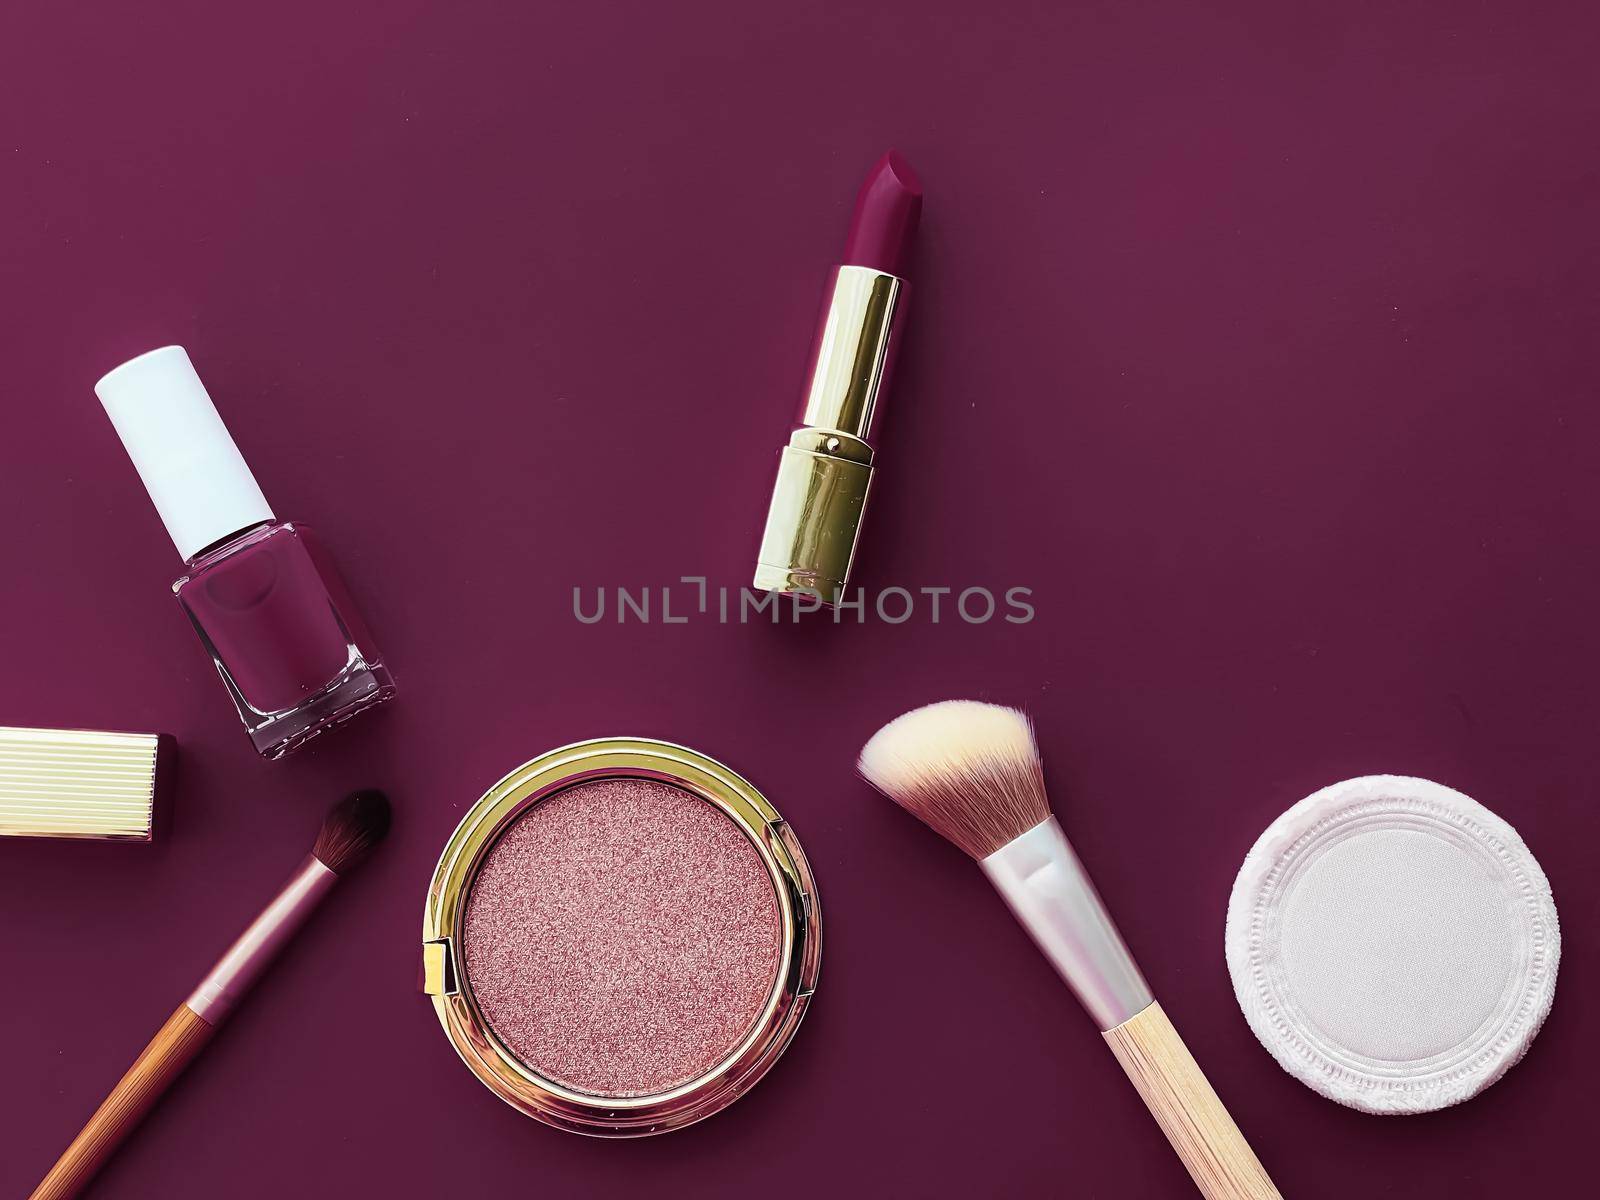 Beauty, make-up and cosmetics flatlay design with copyspace, cosmetic products and makeup tools on purple background, girly and feminine style concept